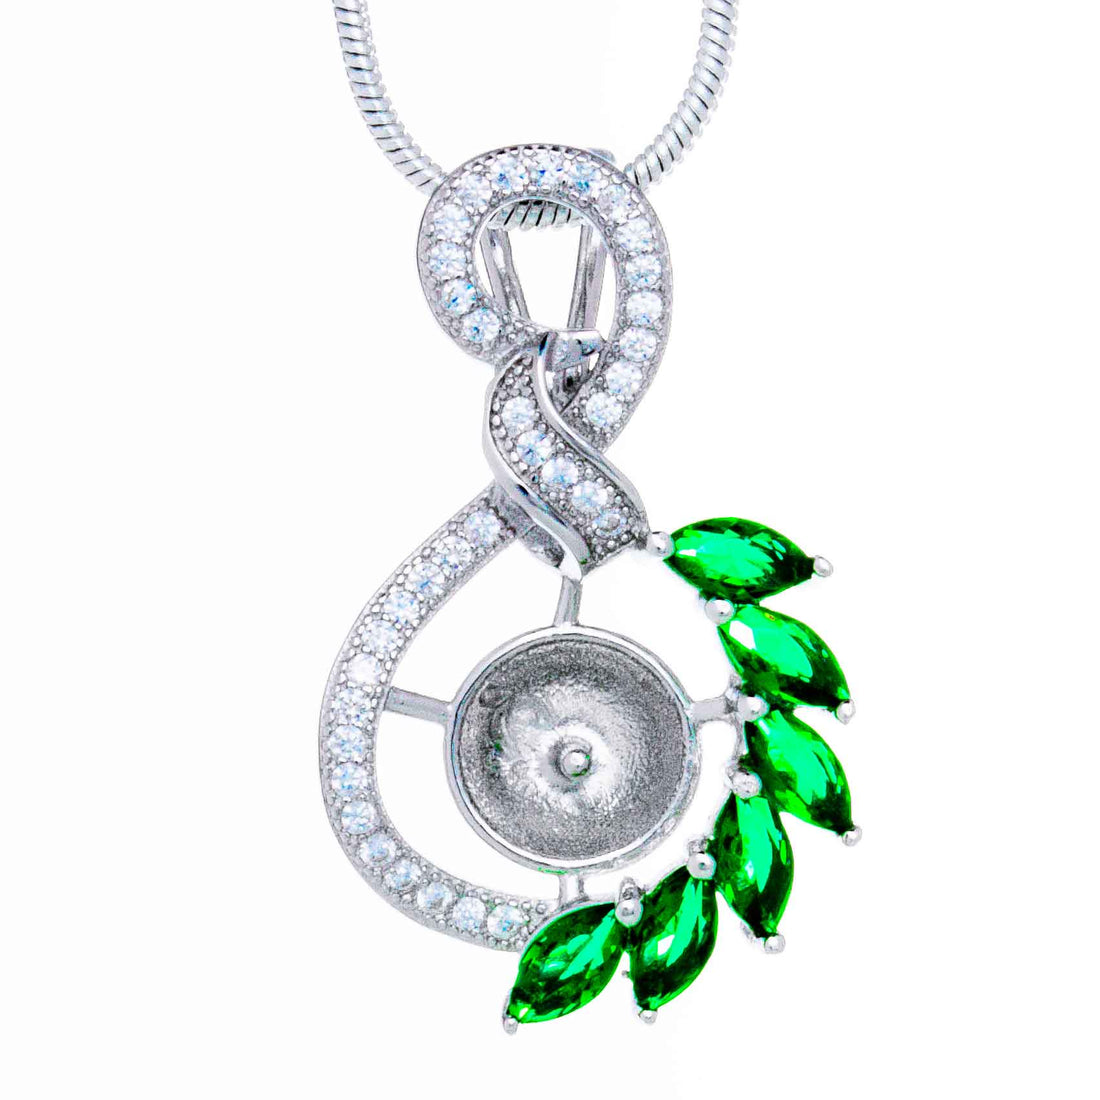 DIY Mount Pendant - 925 Sterling Silver Twisted Green Zircon Crystals